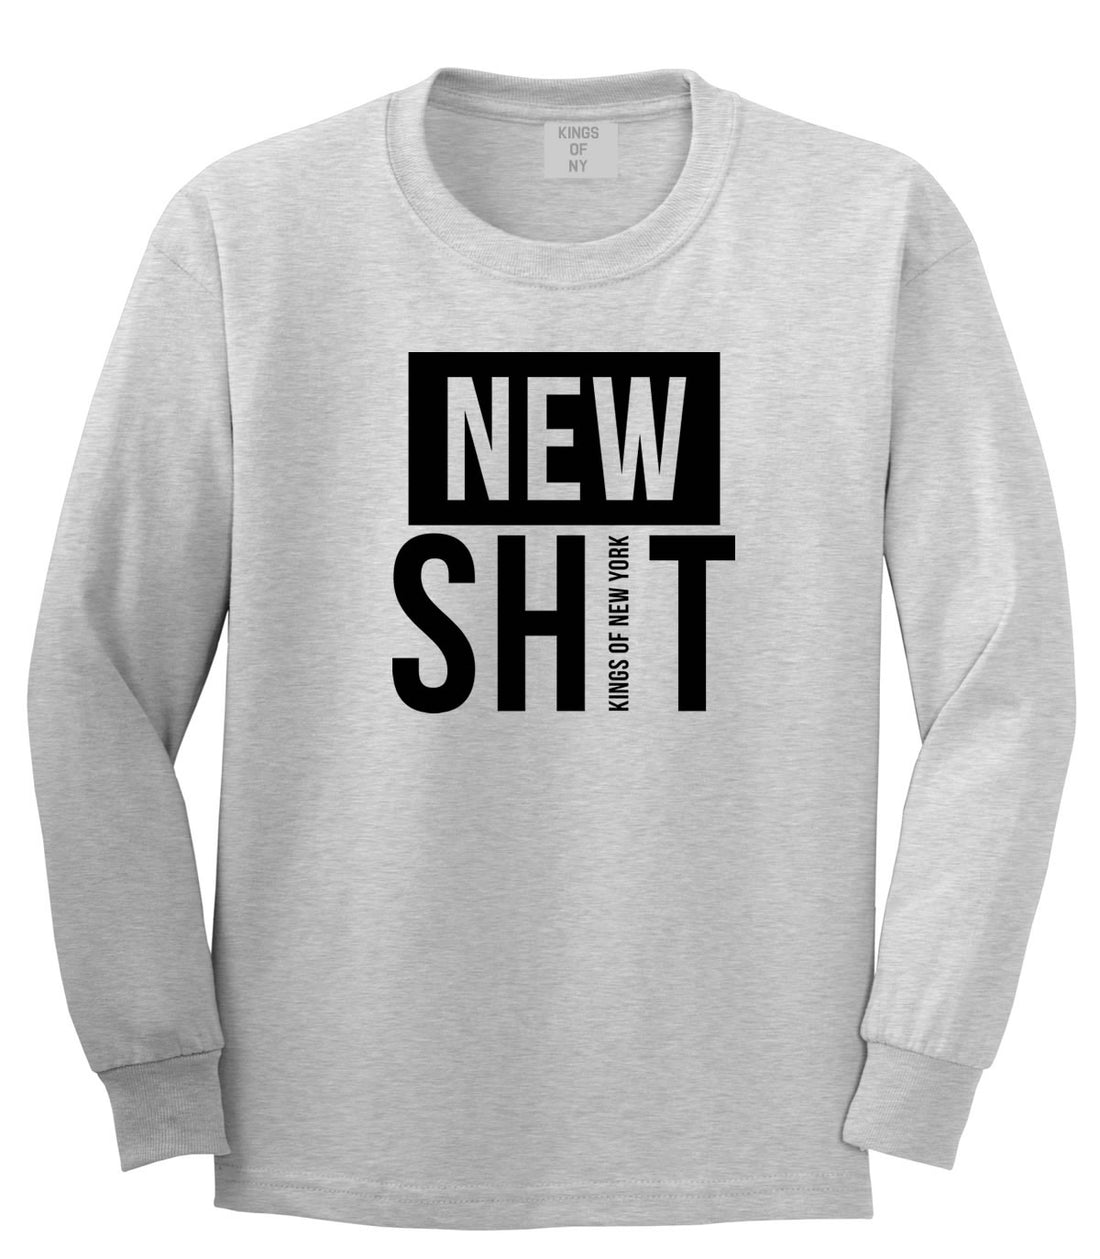 New Shit Long Sleeve T-Shirt in Grey by Kings Of NY